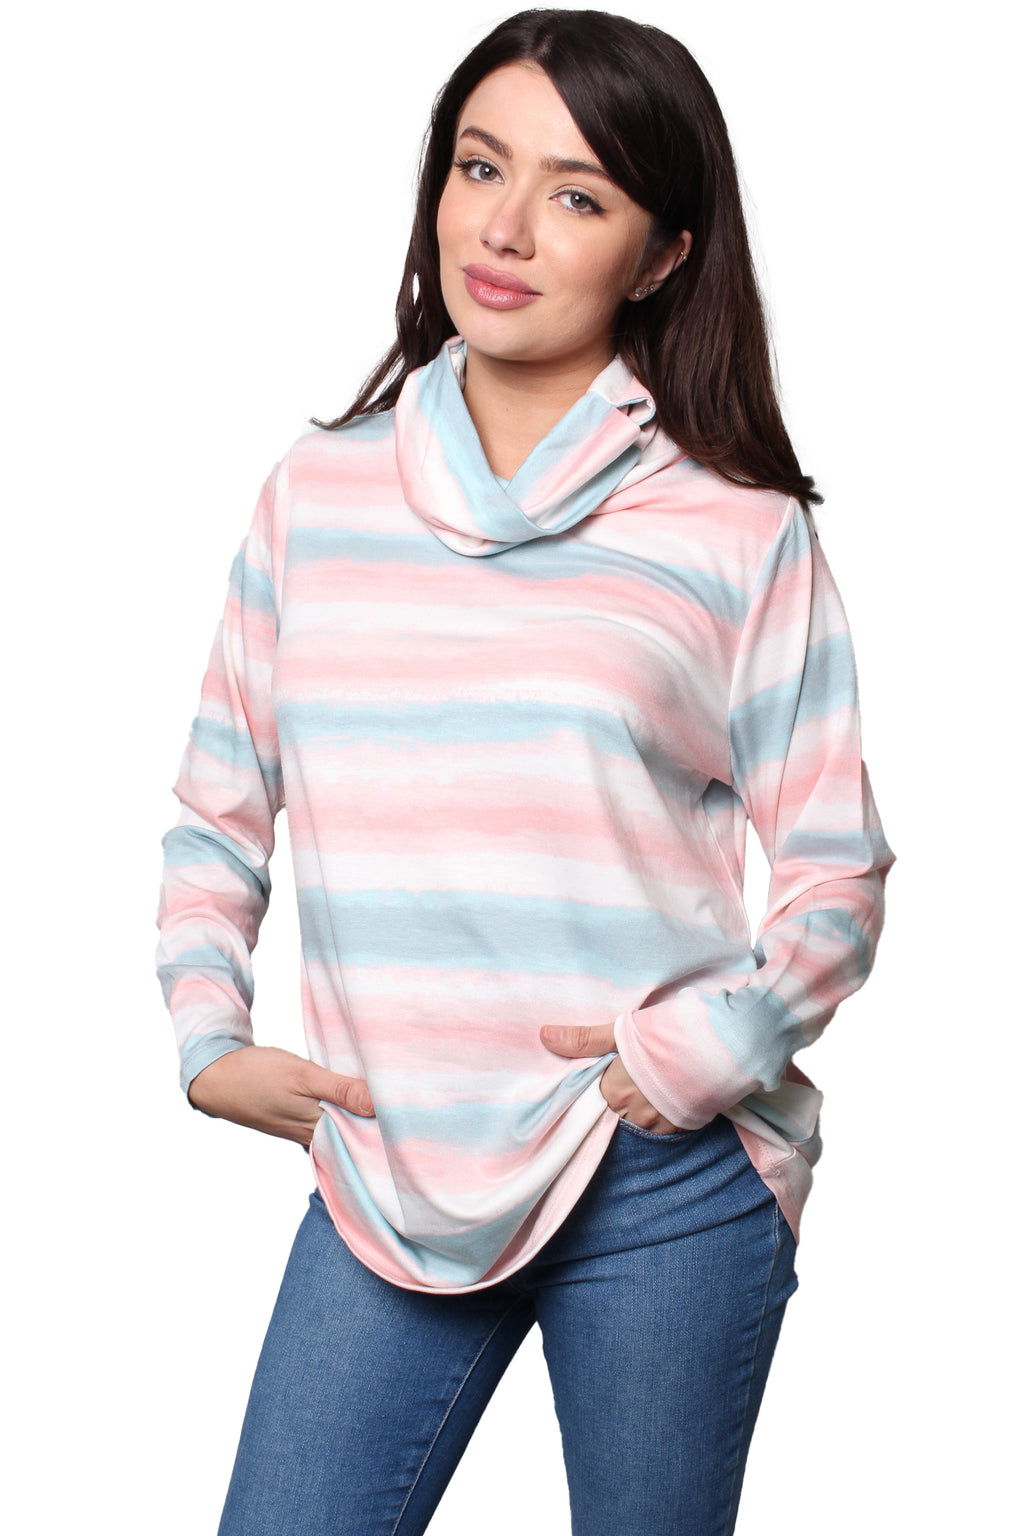 Women's Long Sleeves Cowl Neck Solid Top